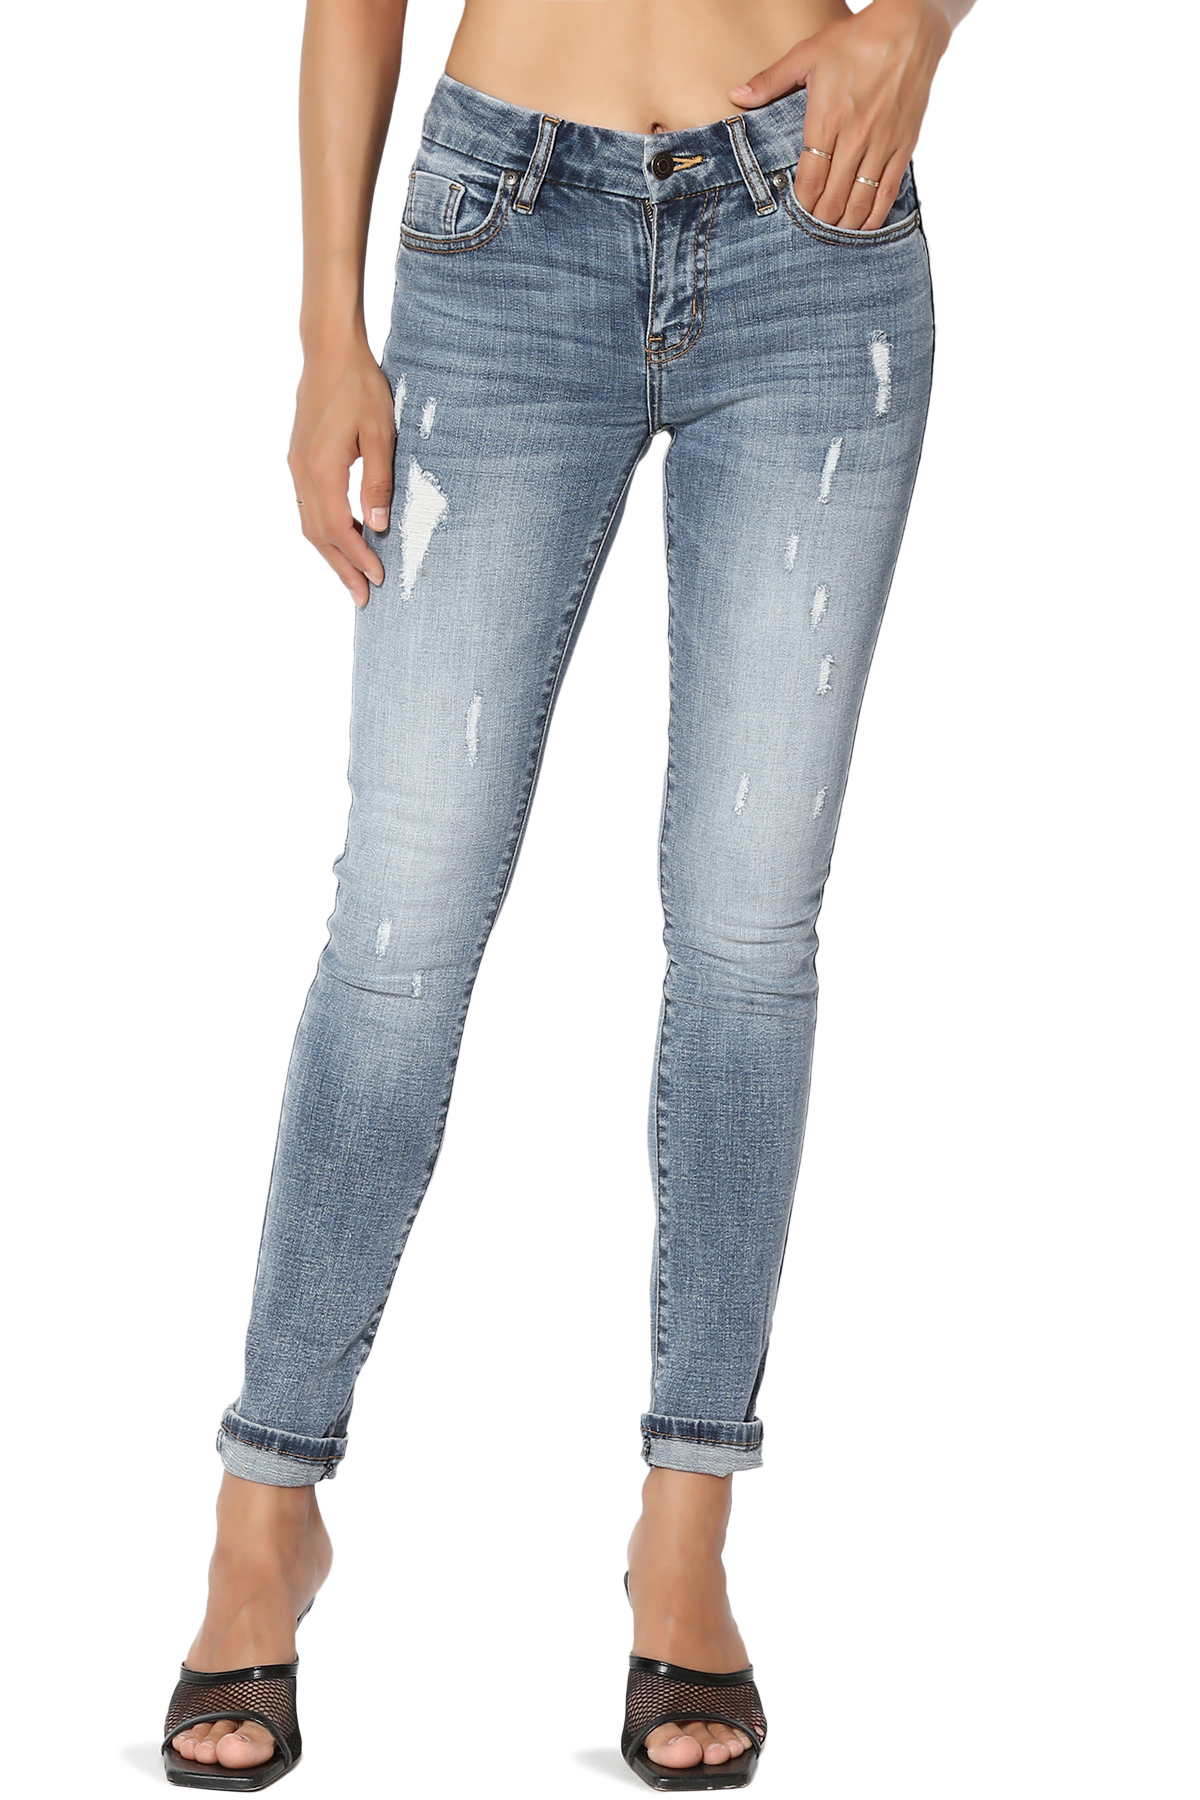 TheMogan Women's 0~3X Roll Up Mid Rise Med Vintage Wash Tencel Denim Skinny Jeans - image 1 of 7